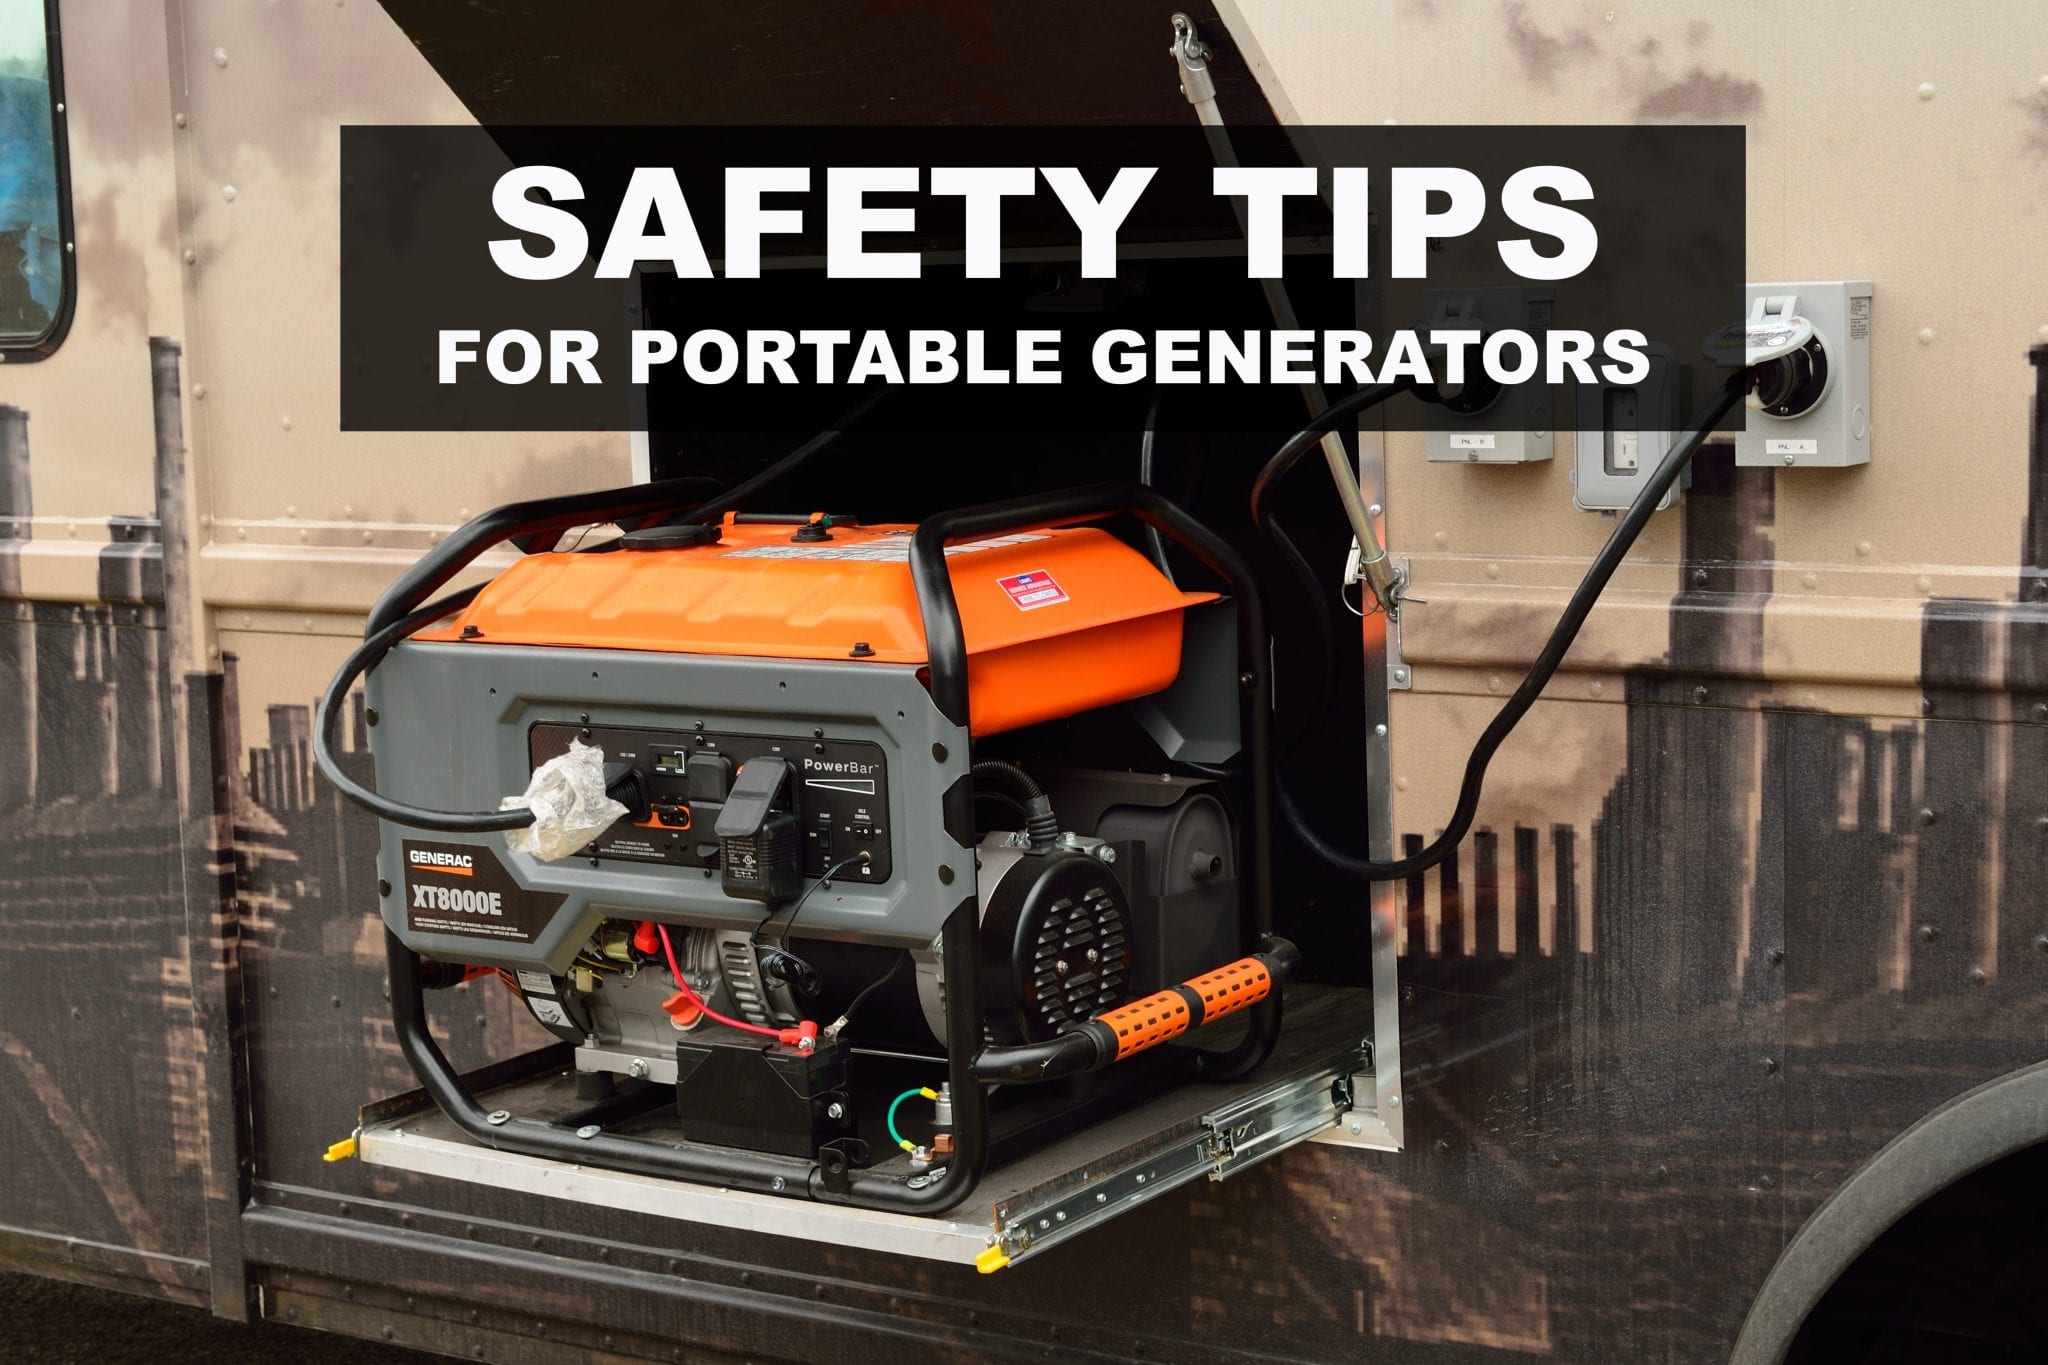 Portable generator with text overlay saying Safety Tips for Portable Genertors